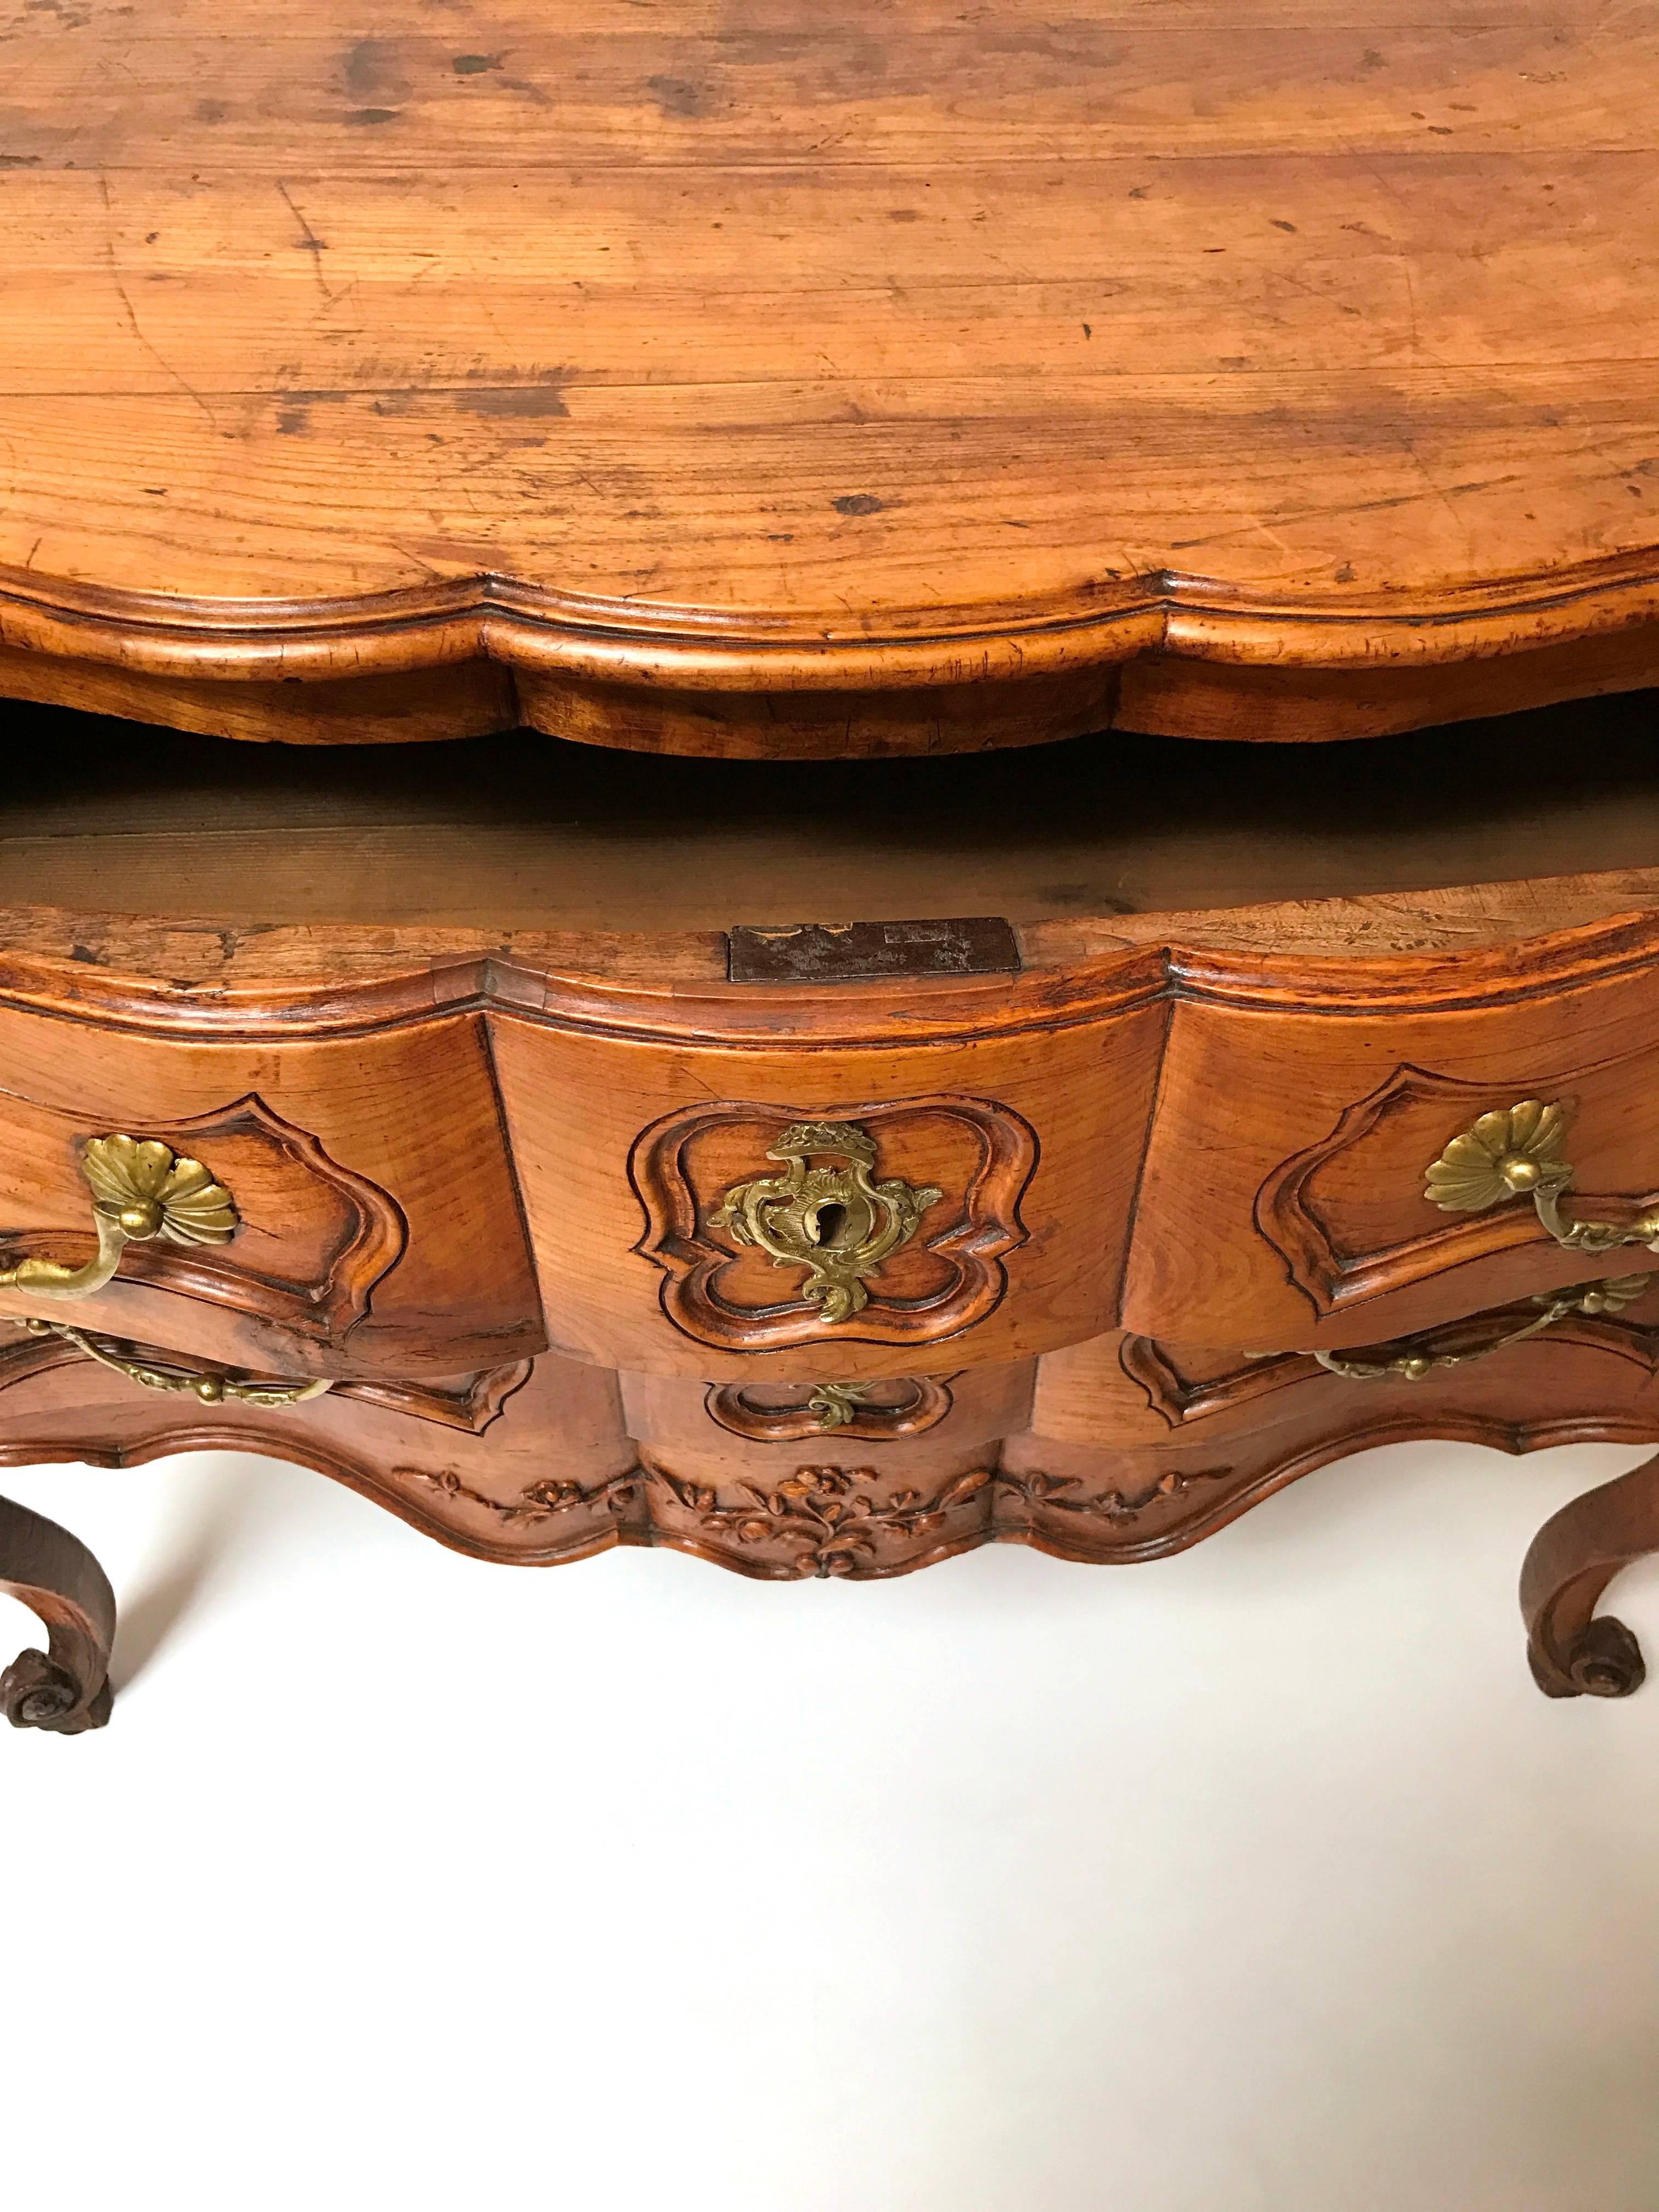 Lovely period Regence cherrywood two-drawer commode with exuberant cabriole legs and a serpentine front with original hardware from Normandy, circa 1720.